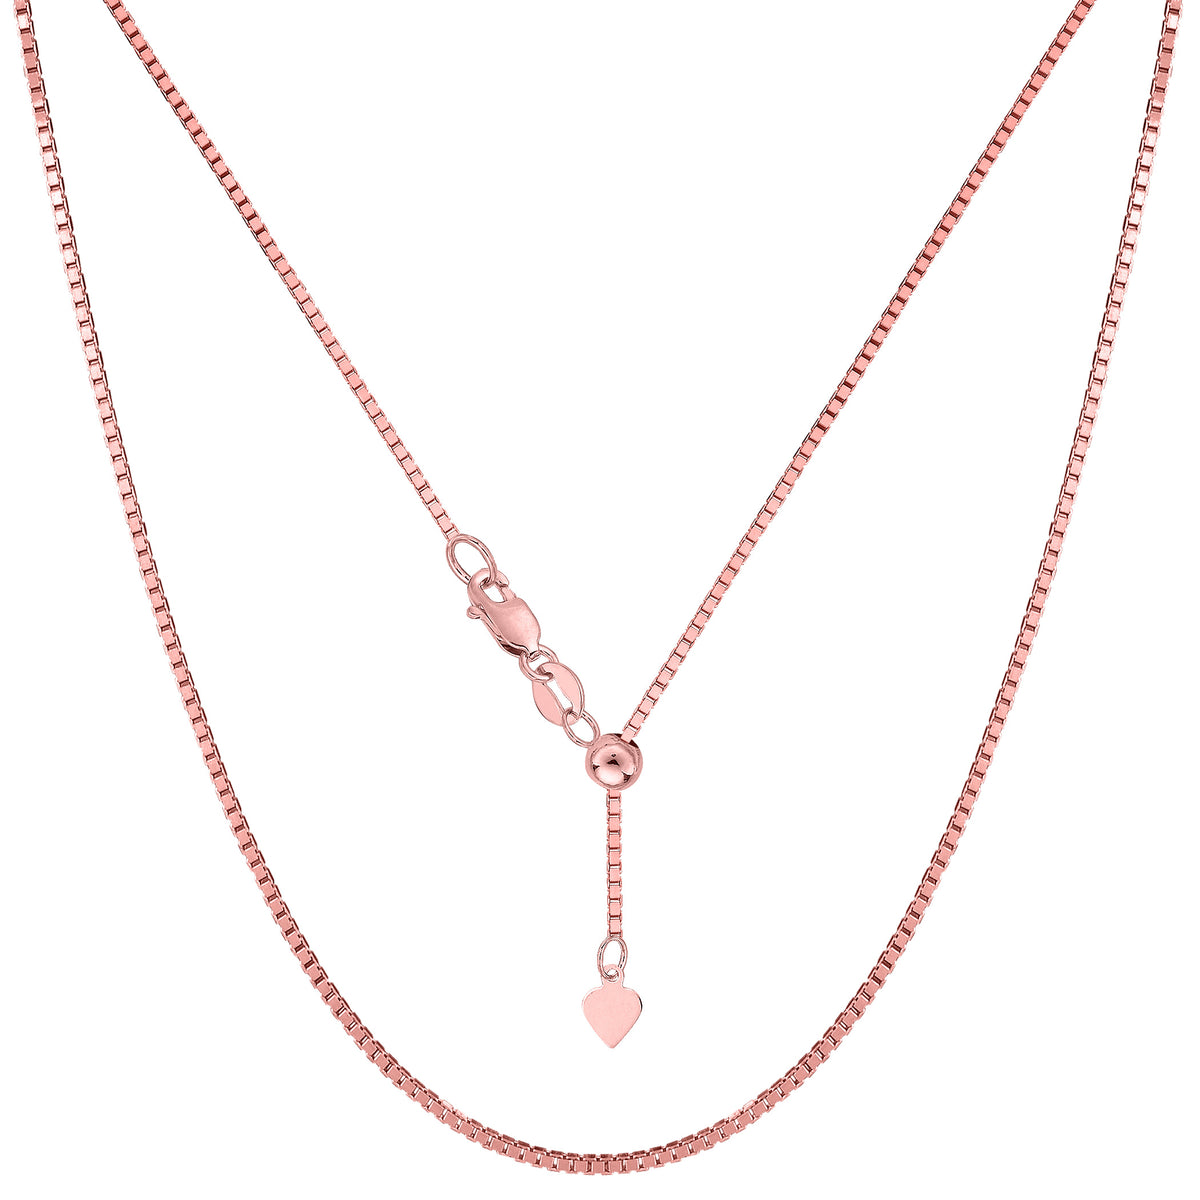 Sterling Silver Rose Tone Plated Sliding Adjustable Box Chain Necklace, 1.4mm, 22" fine designer jewelry for men and women